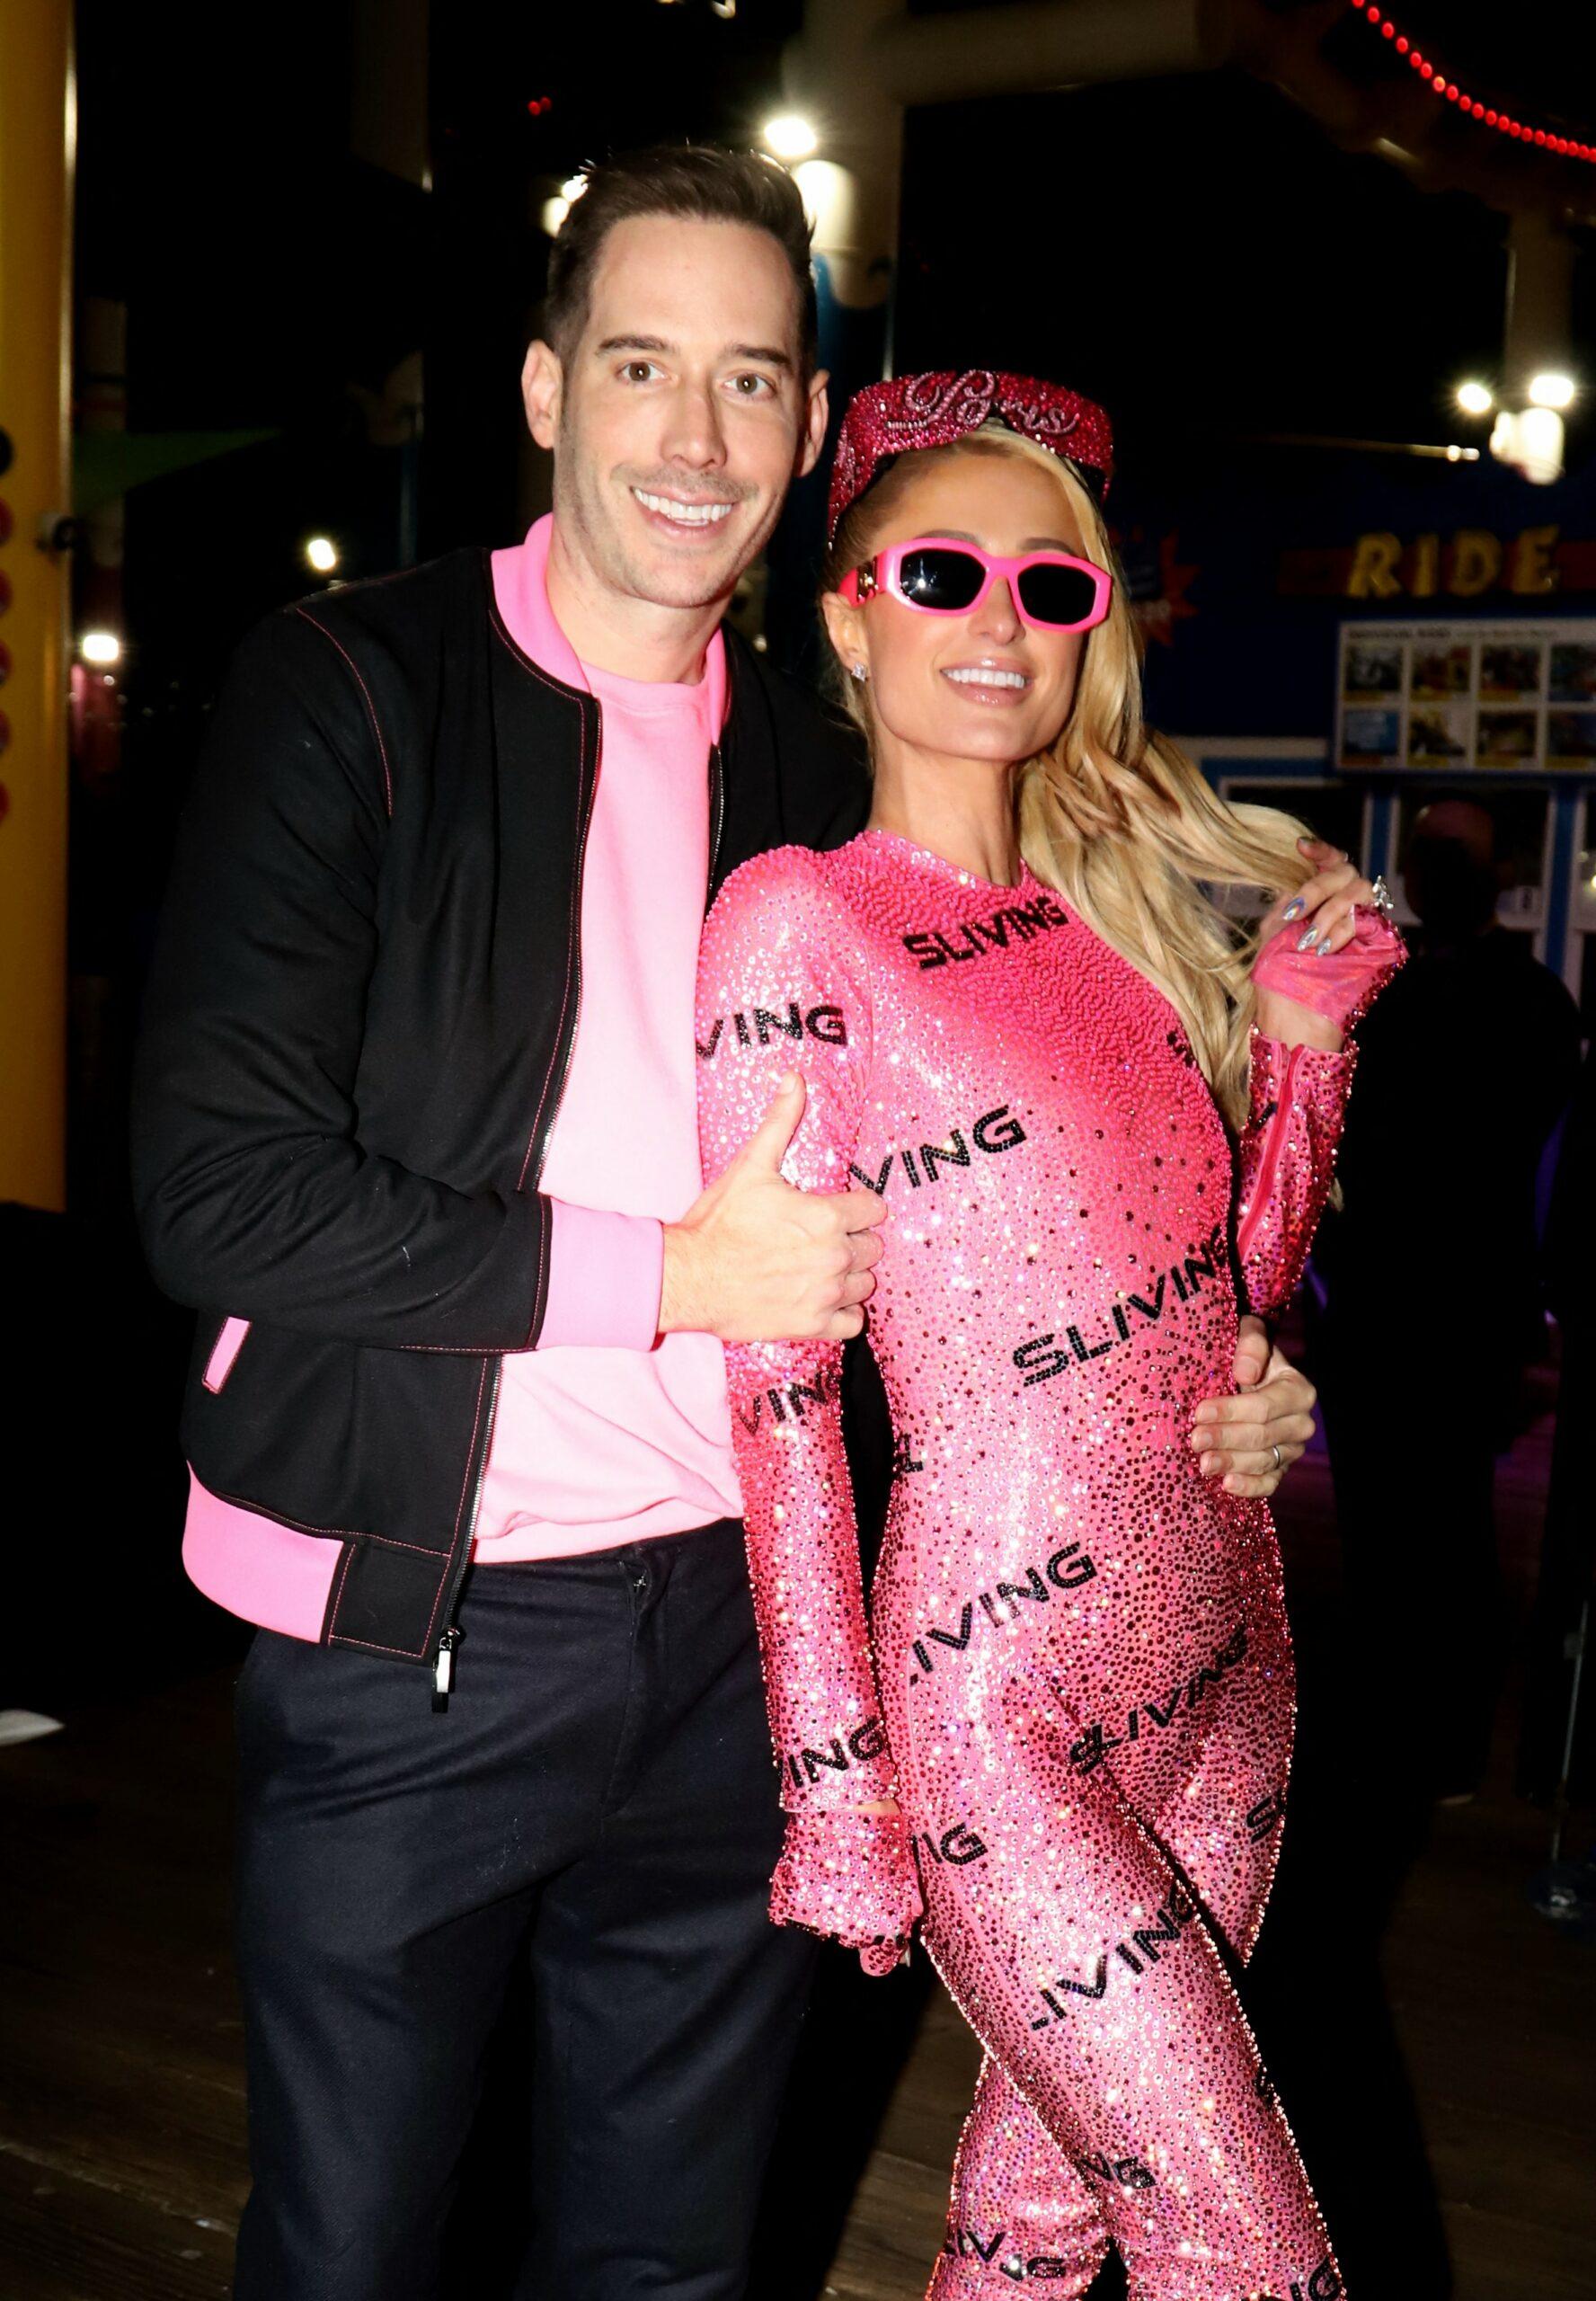 Paris Hilton celebrates her one year Anniversary with husband Carter Reum